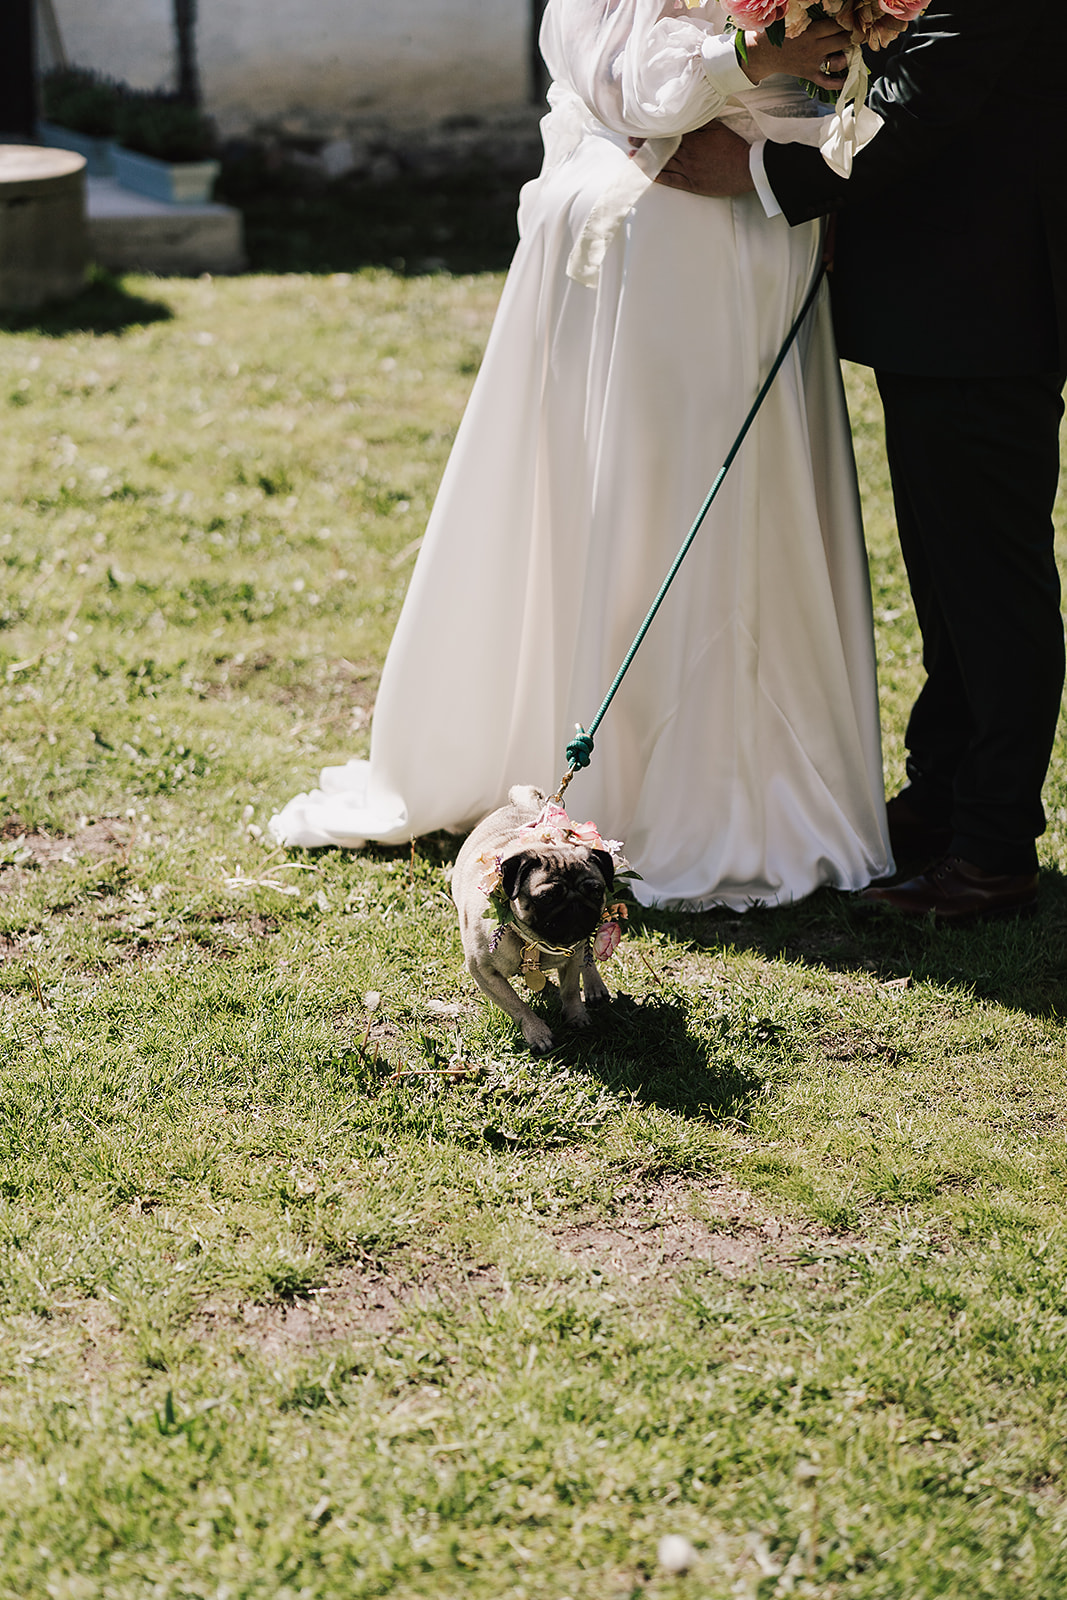 couples dog waiting patiently to walk down aisle